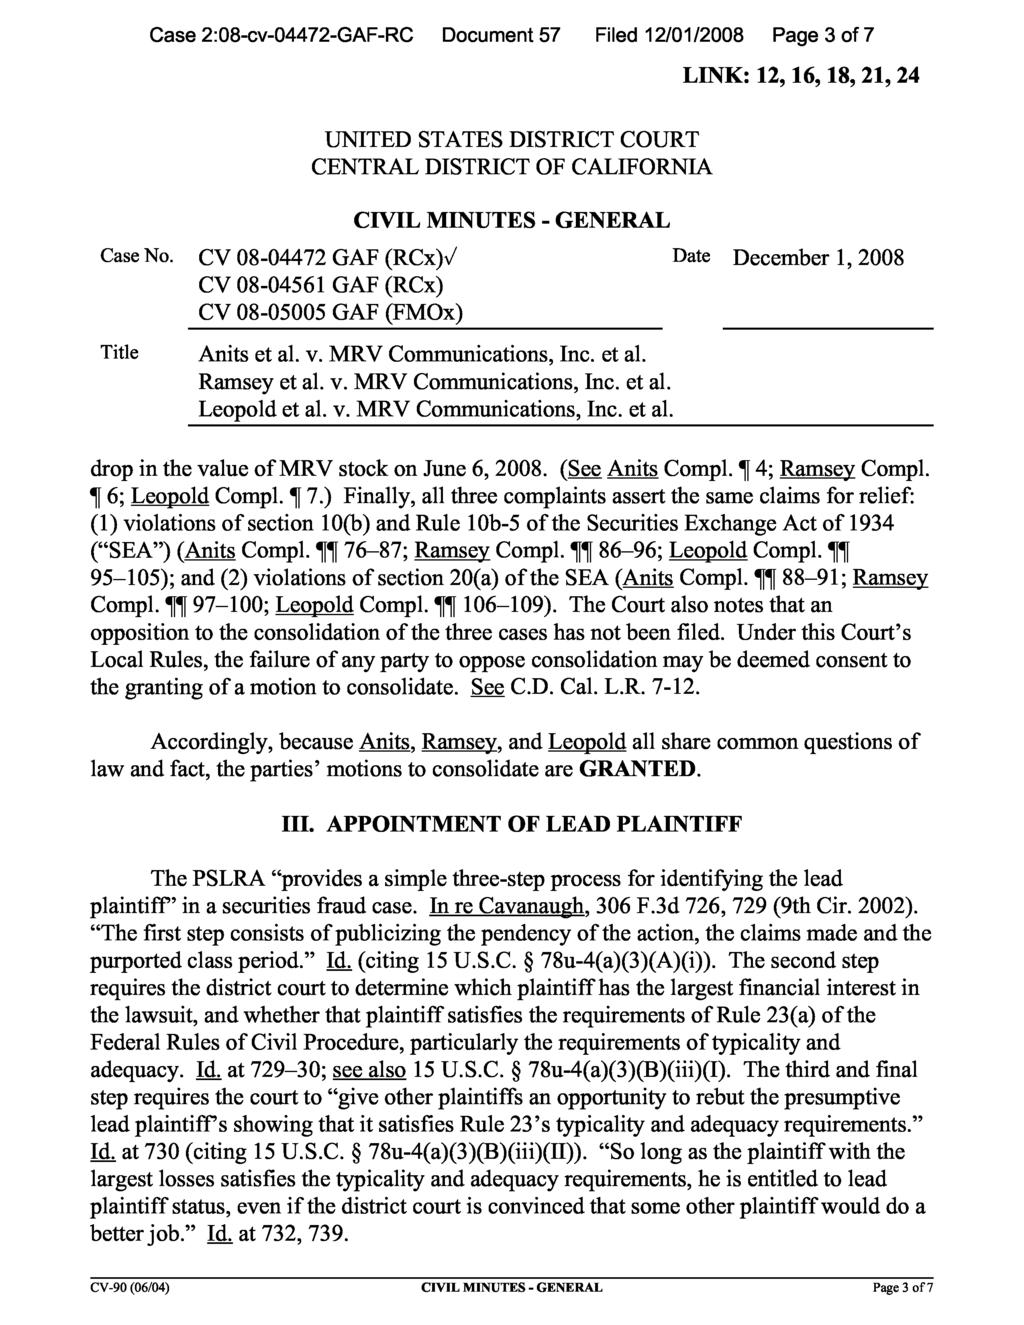 Case 2:08-cv-04472-GAF-RC Document 57 Filed 12/01/2008 Page 3 of 7 